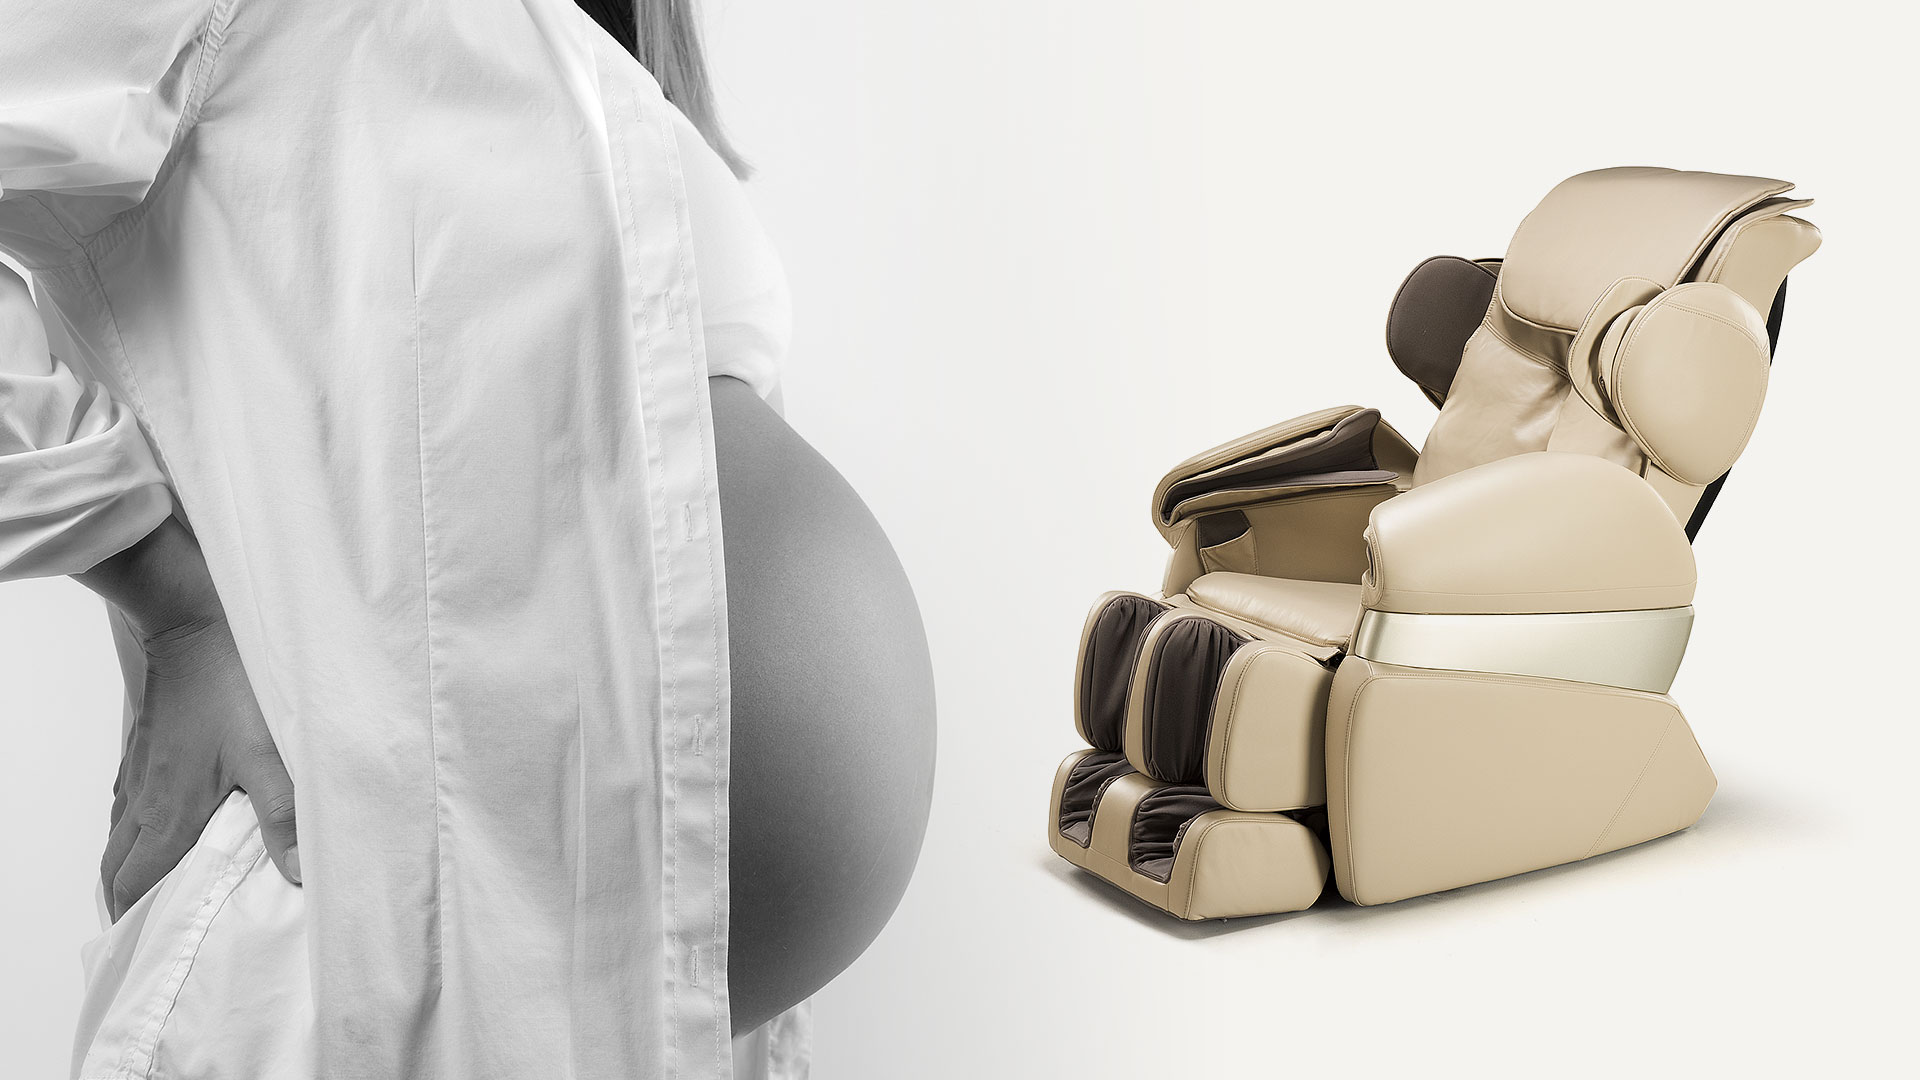 Can you use the massage chair while being pregnant?